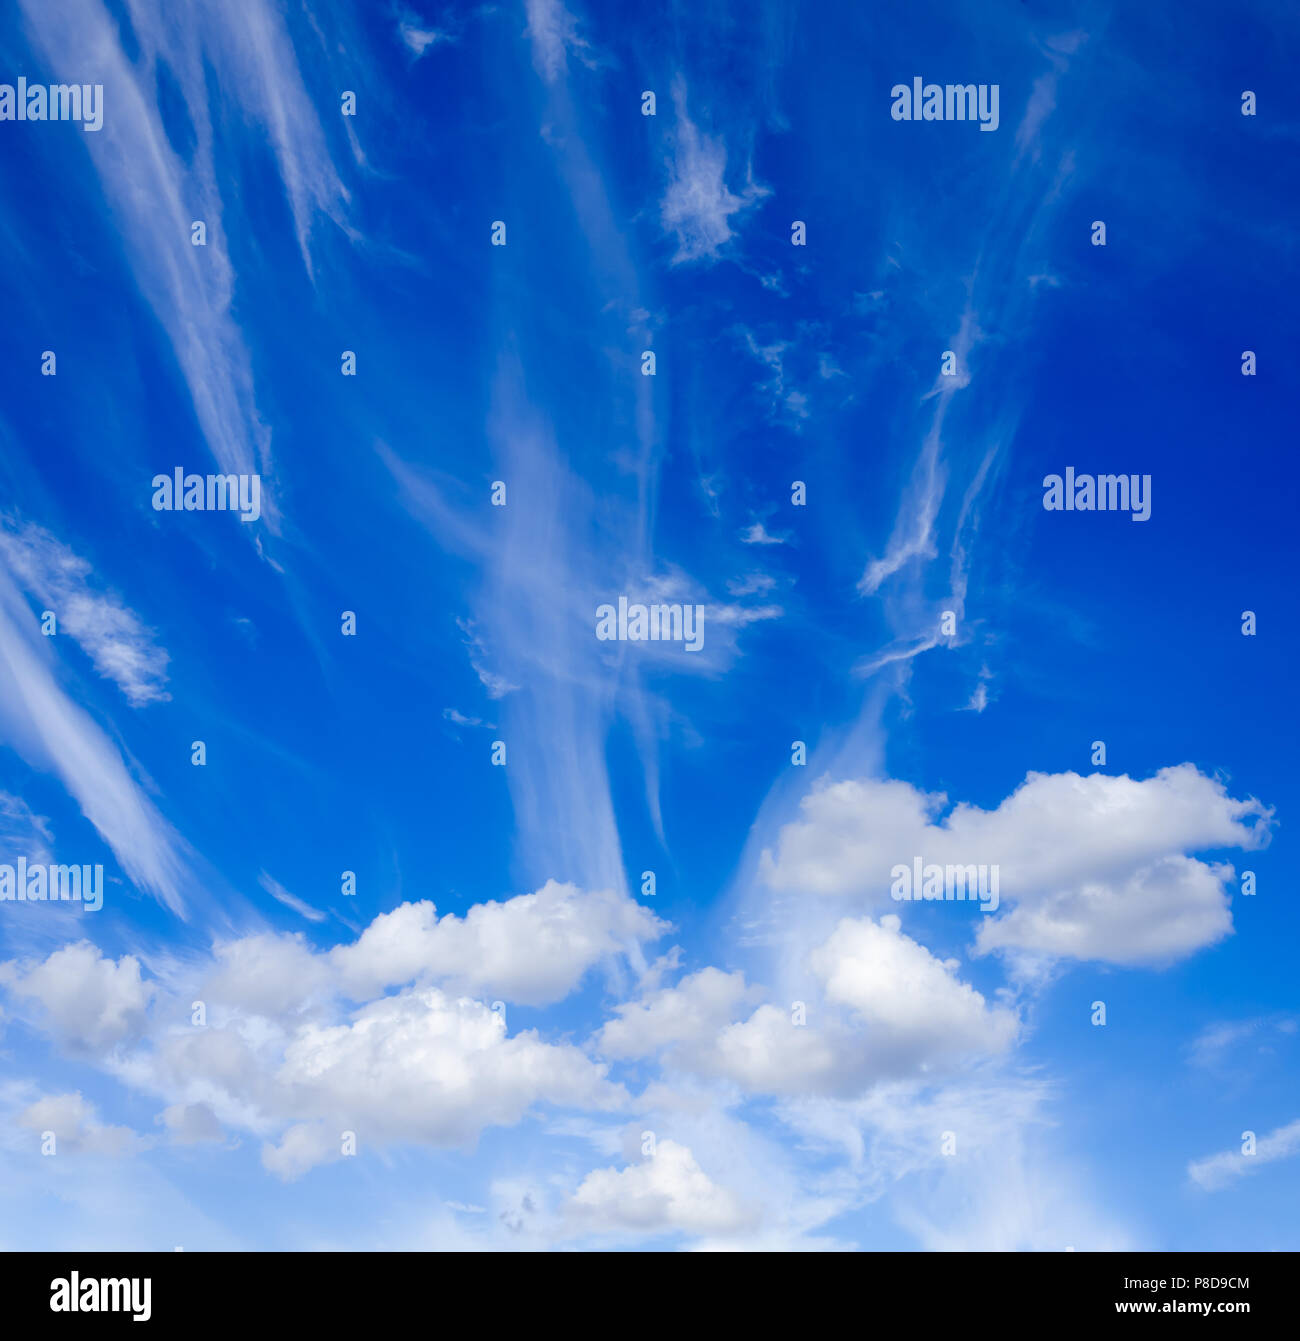 Background blue sky with white abstract clouds Stock Photo